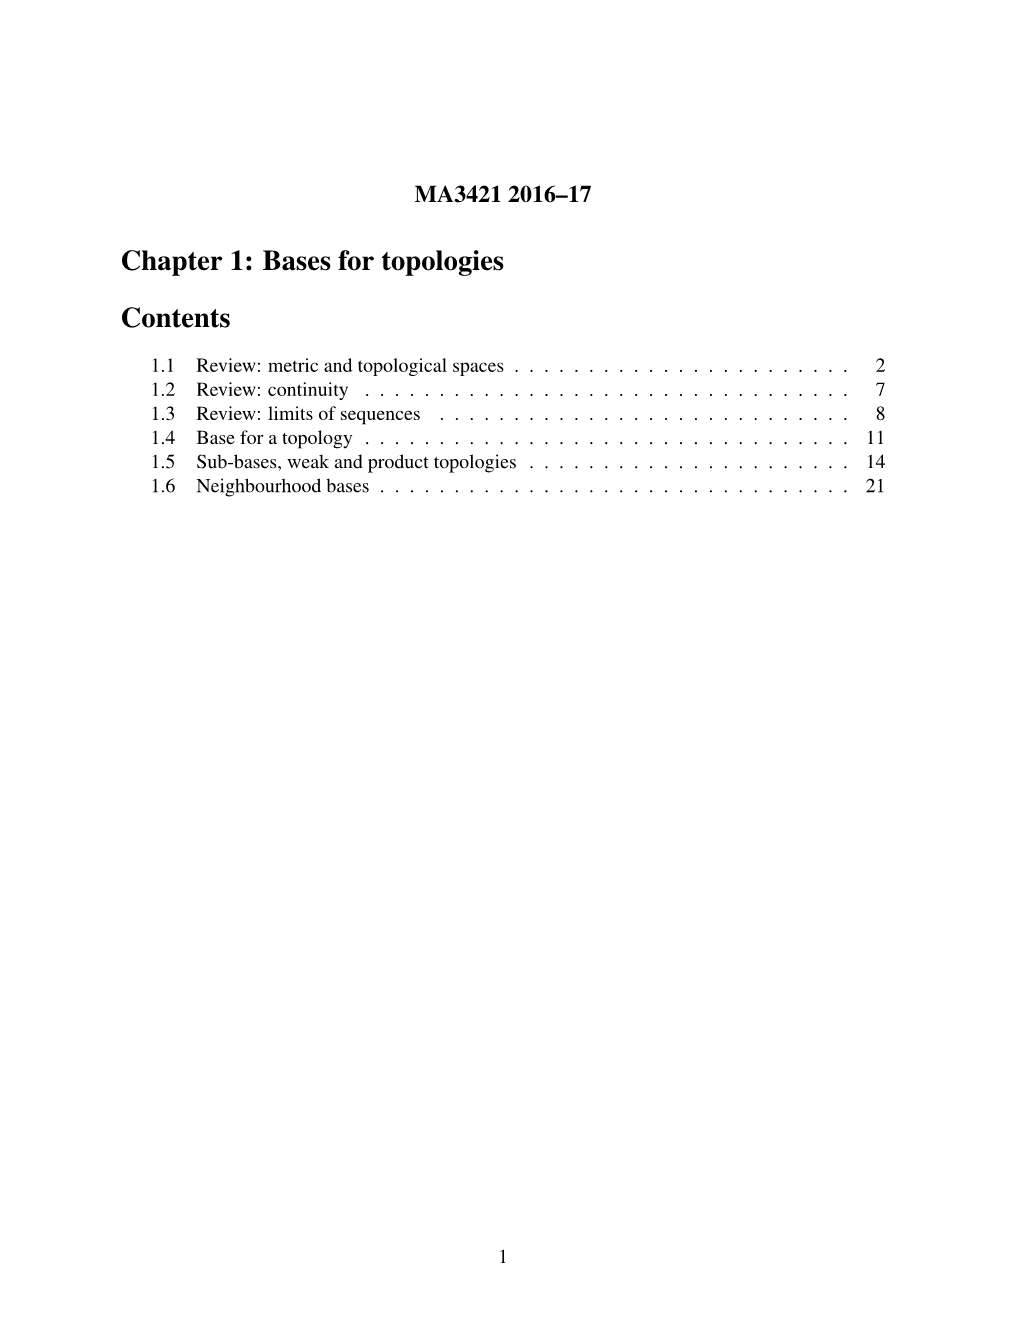 Chapter 1: Bases for Topologies Contents